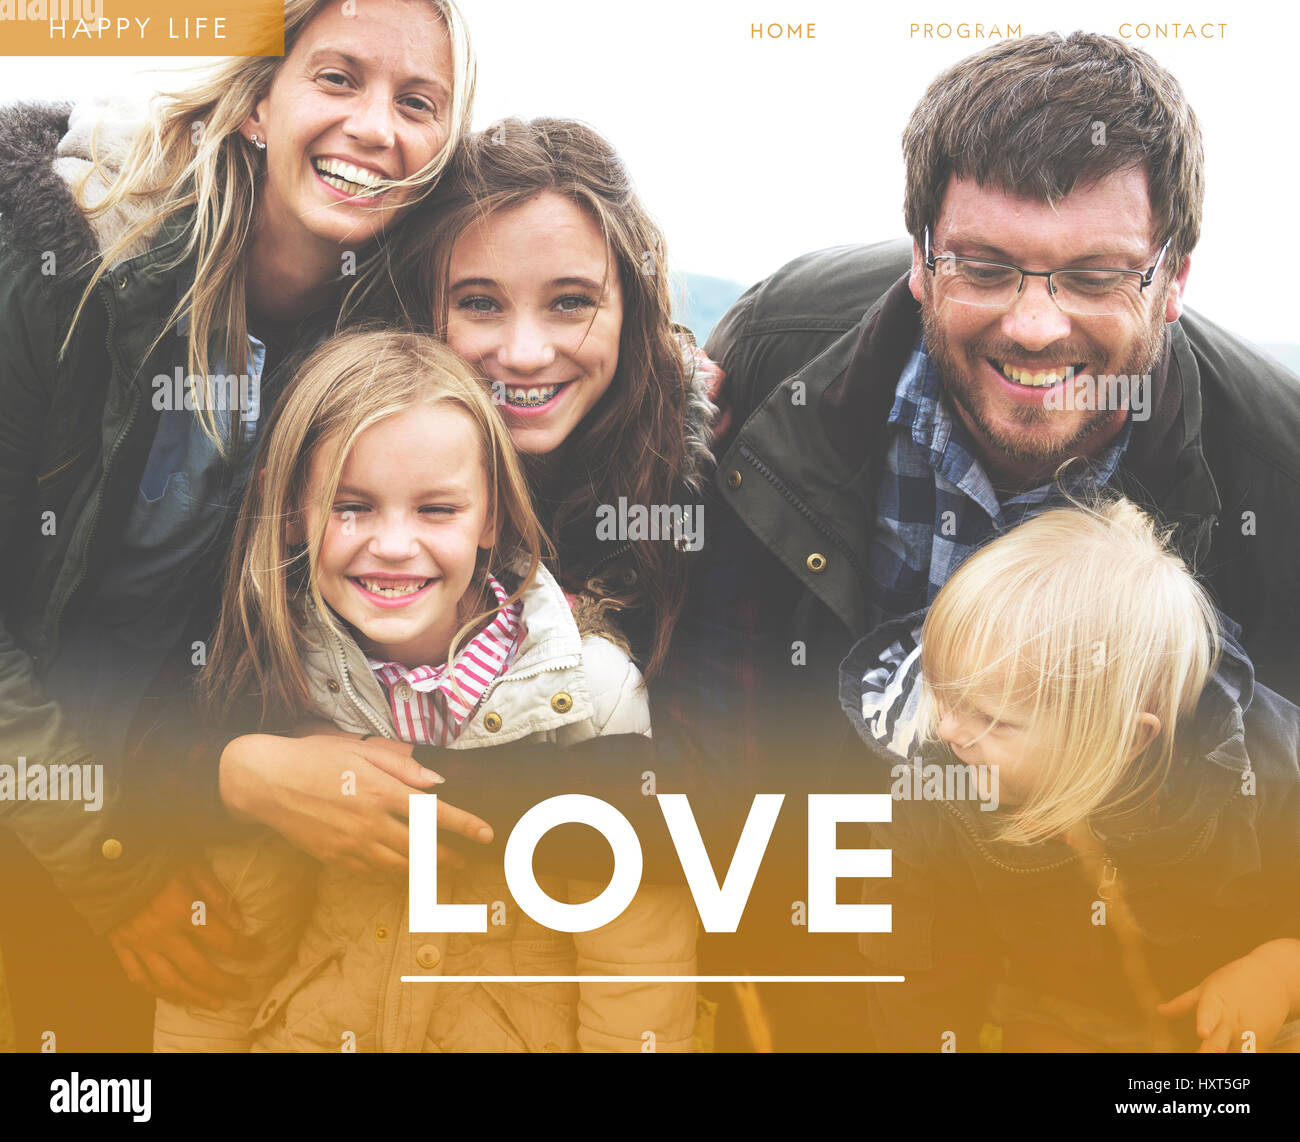 Family Happiness Togetherness Bonding Icon Stock Photo